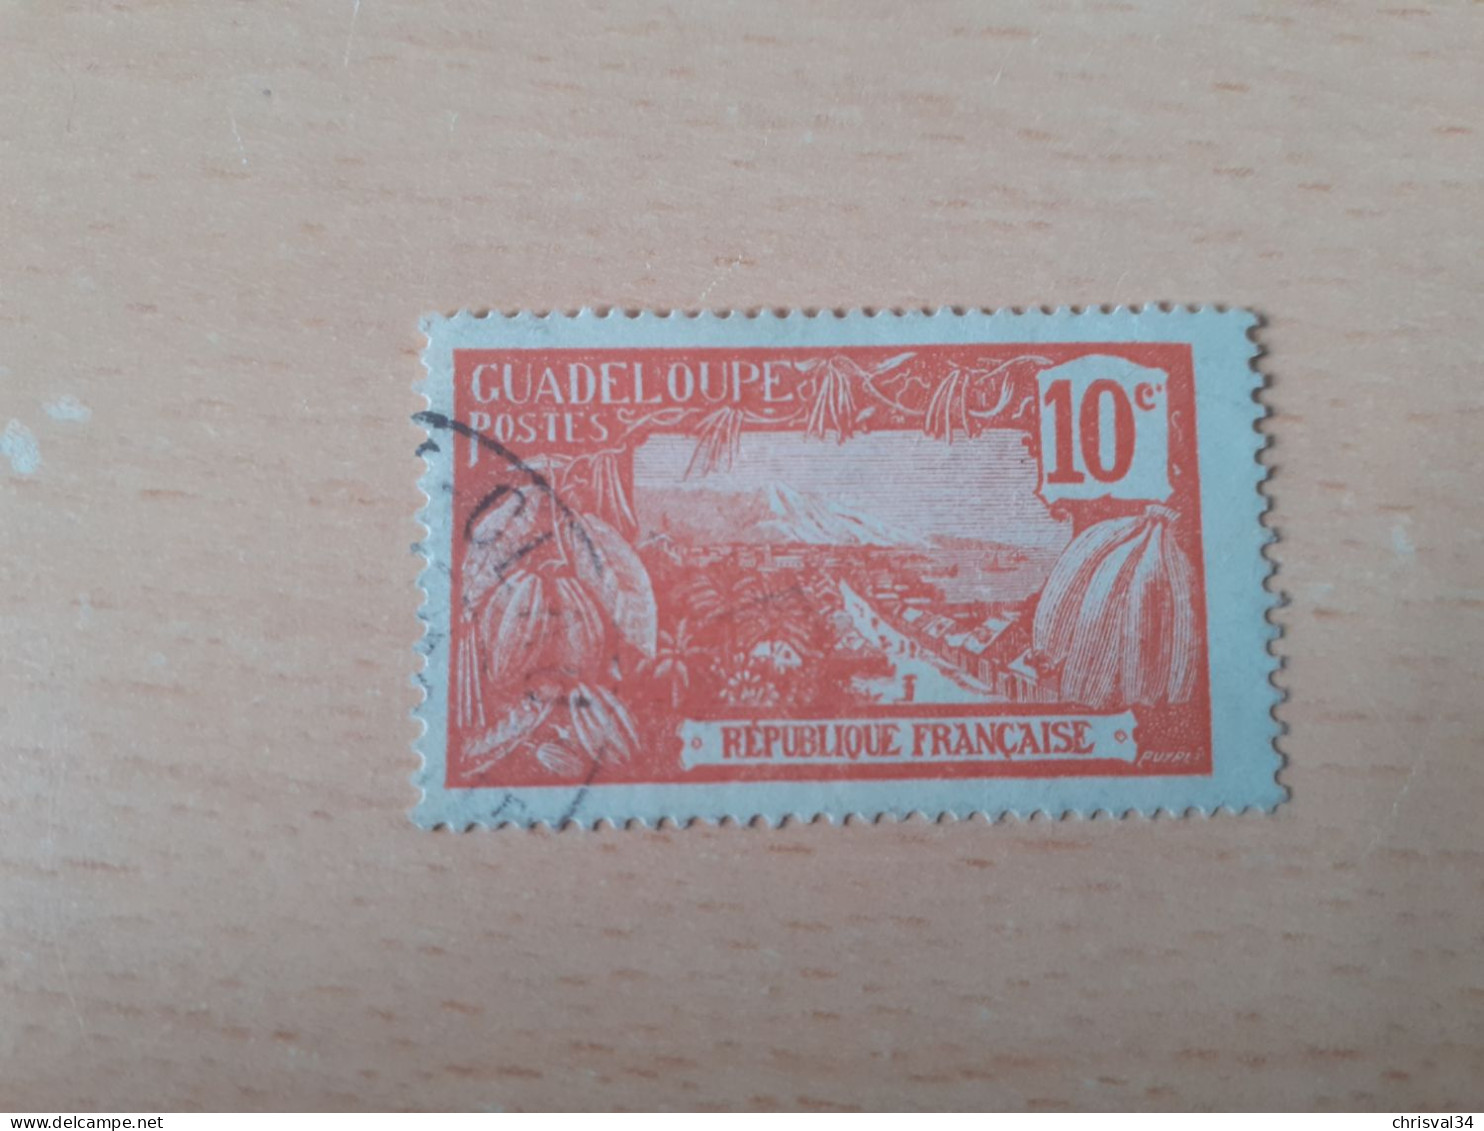 TIMBRE   GUADELOUPE       N  79     COTE  0,25   EUROS  OBLITERE - Used Stamps